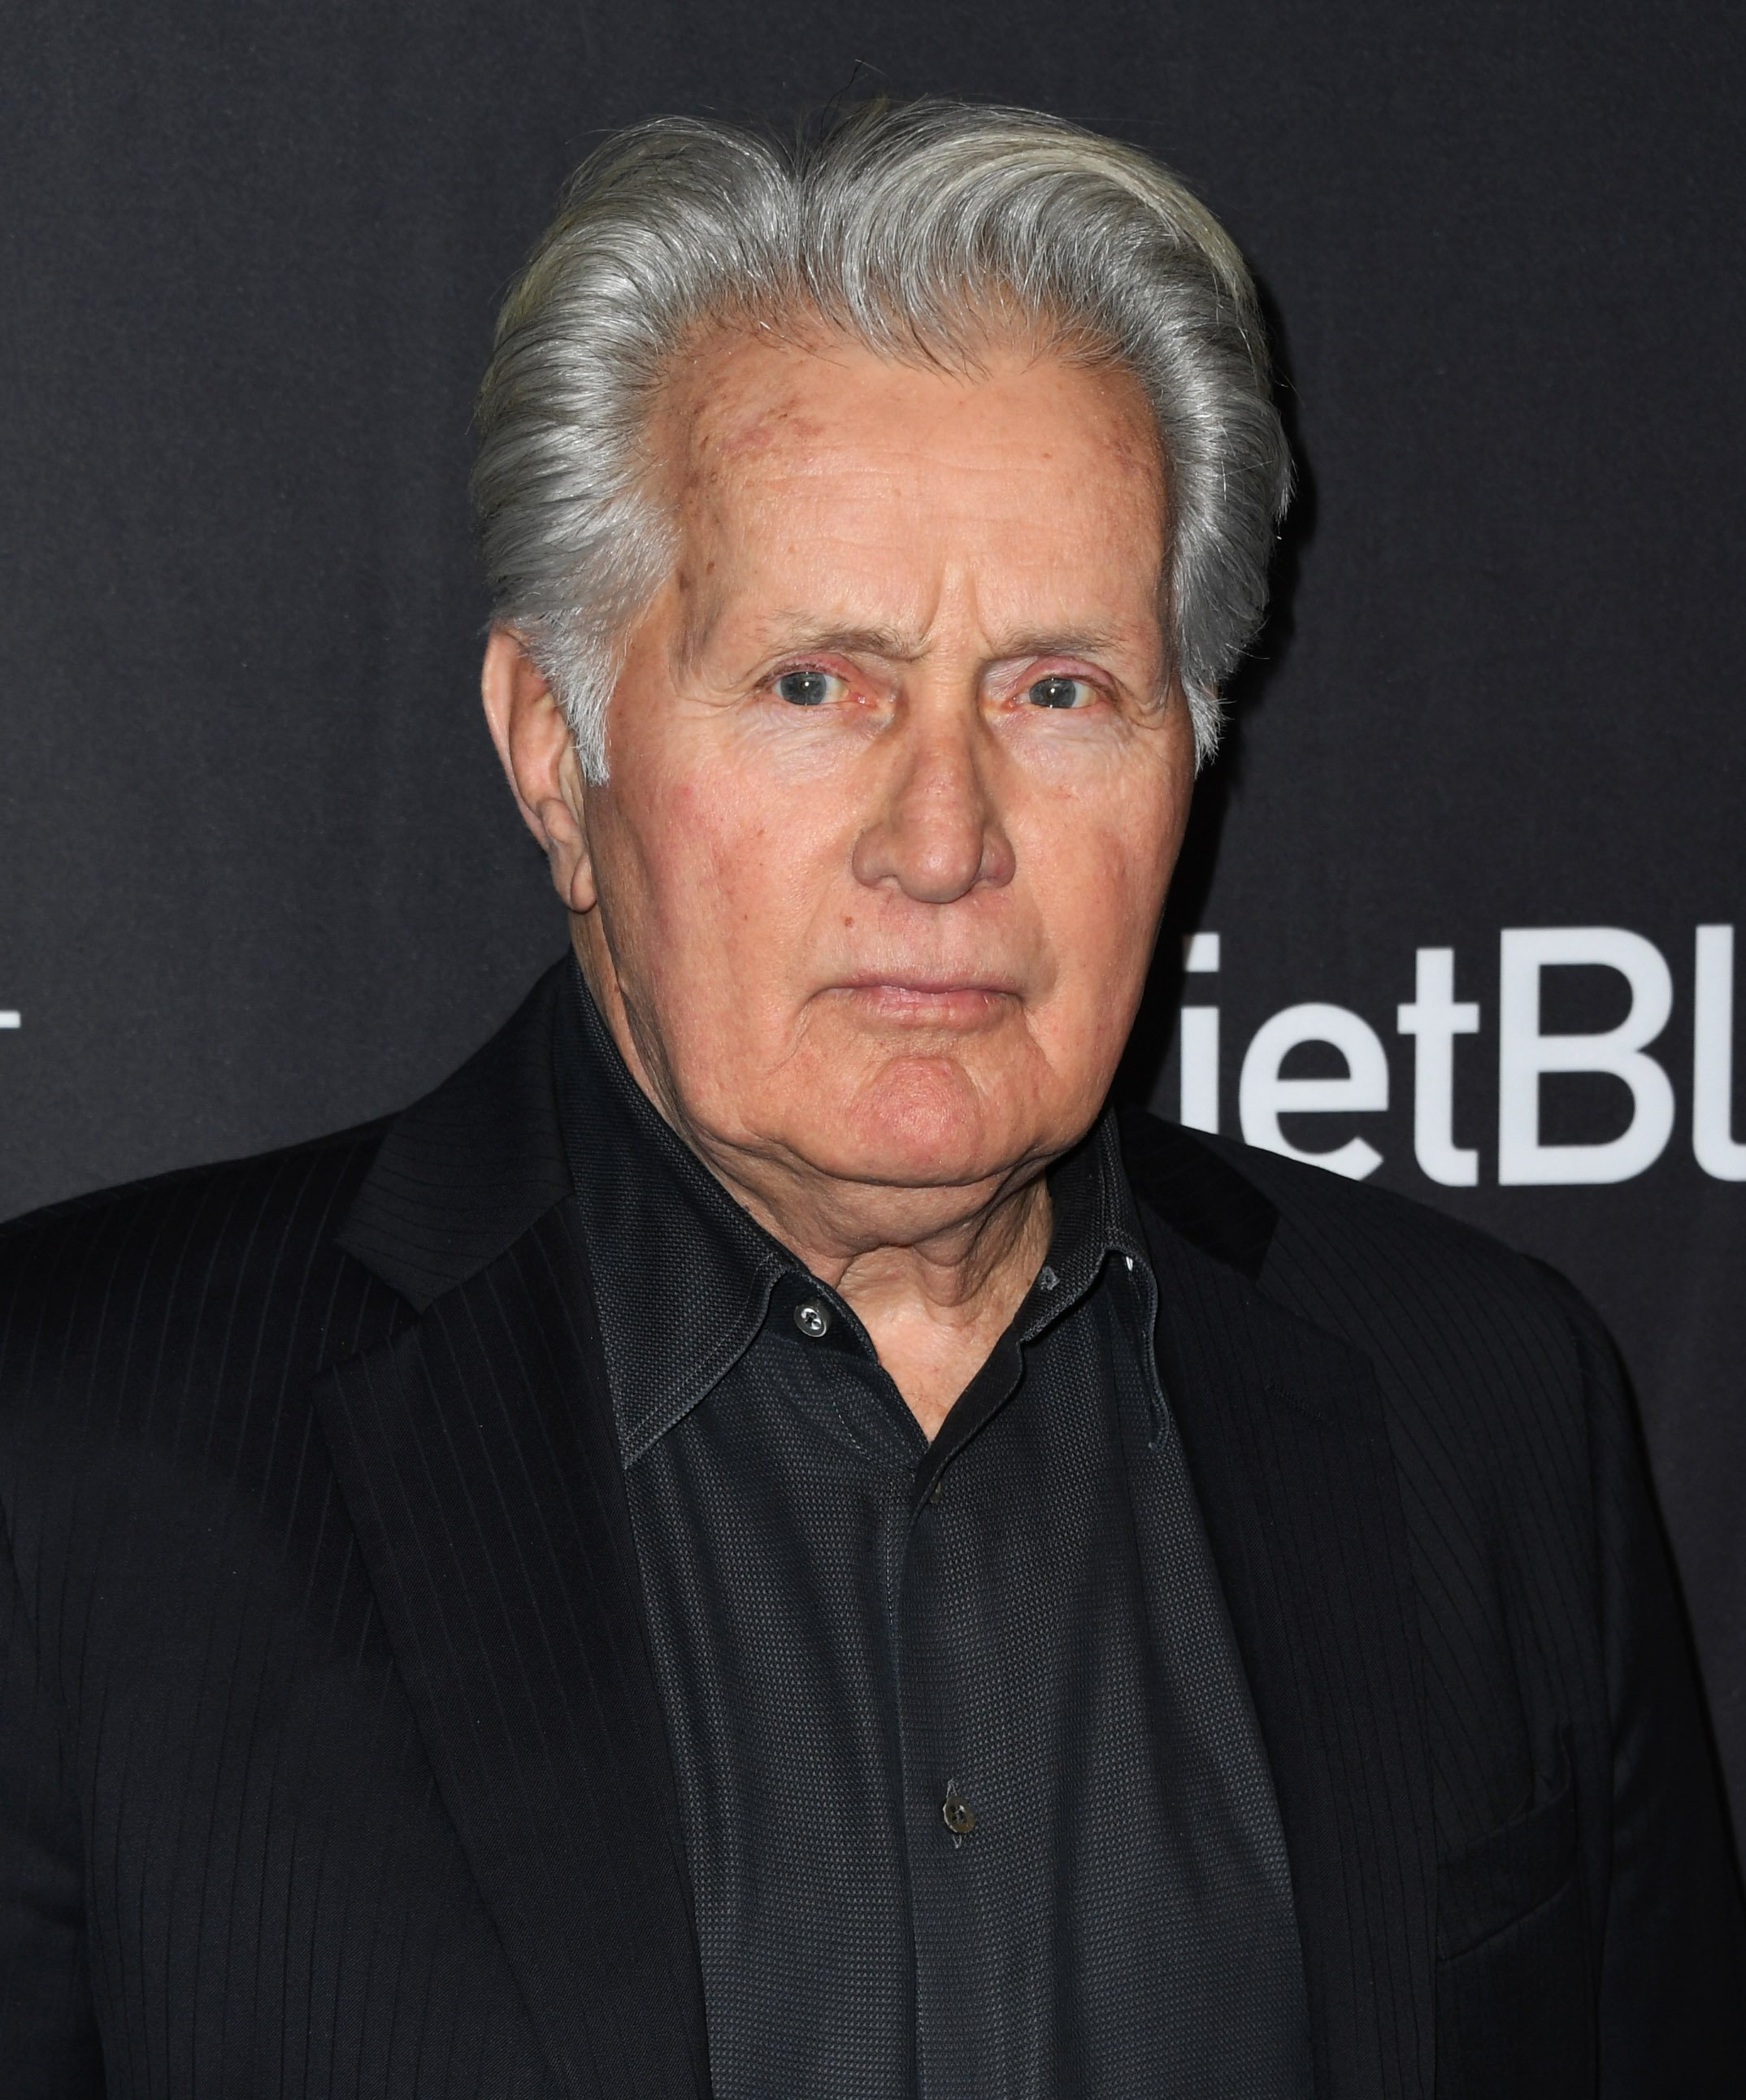 Martin Sheen attending The Paley Center For Media's 2019 PaleyFest LA - "Grace And Frankie" at Dolby Theatre on March 16, 2019 in Hollywood, California. / Source: Getty Images